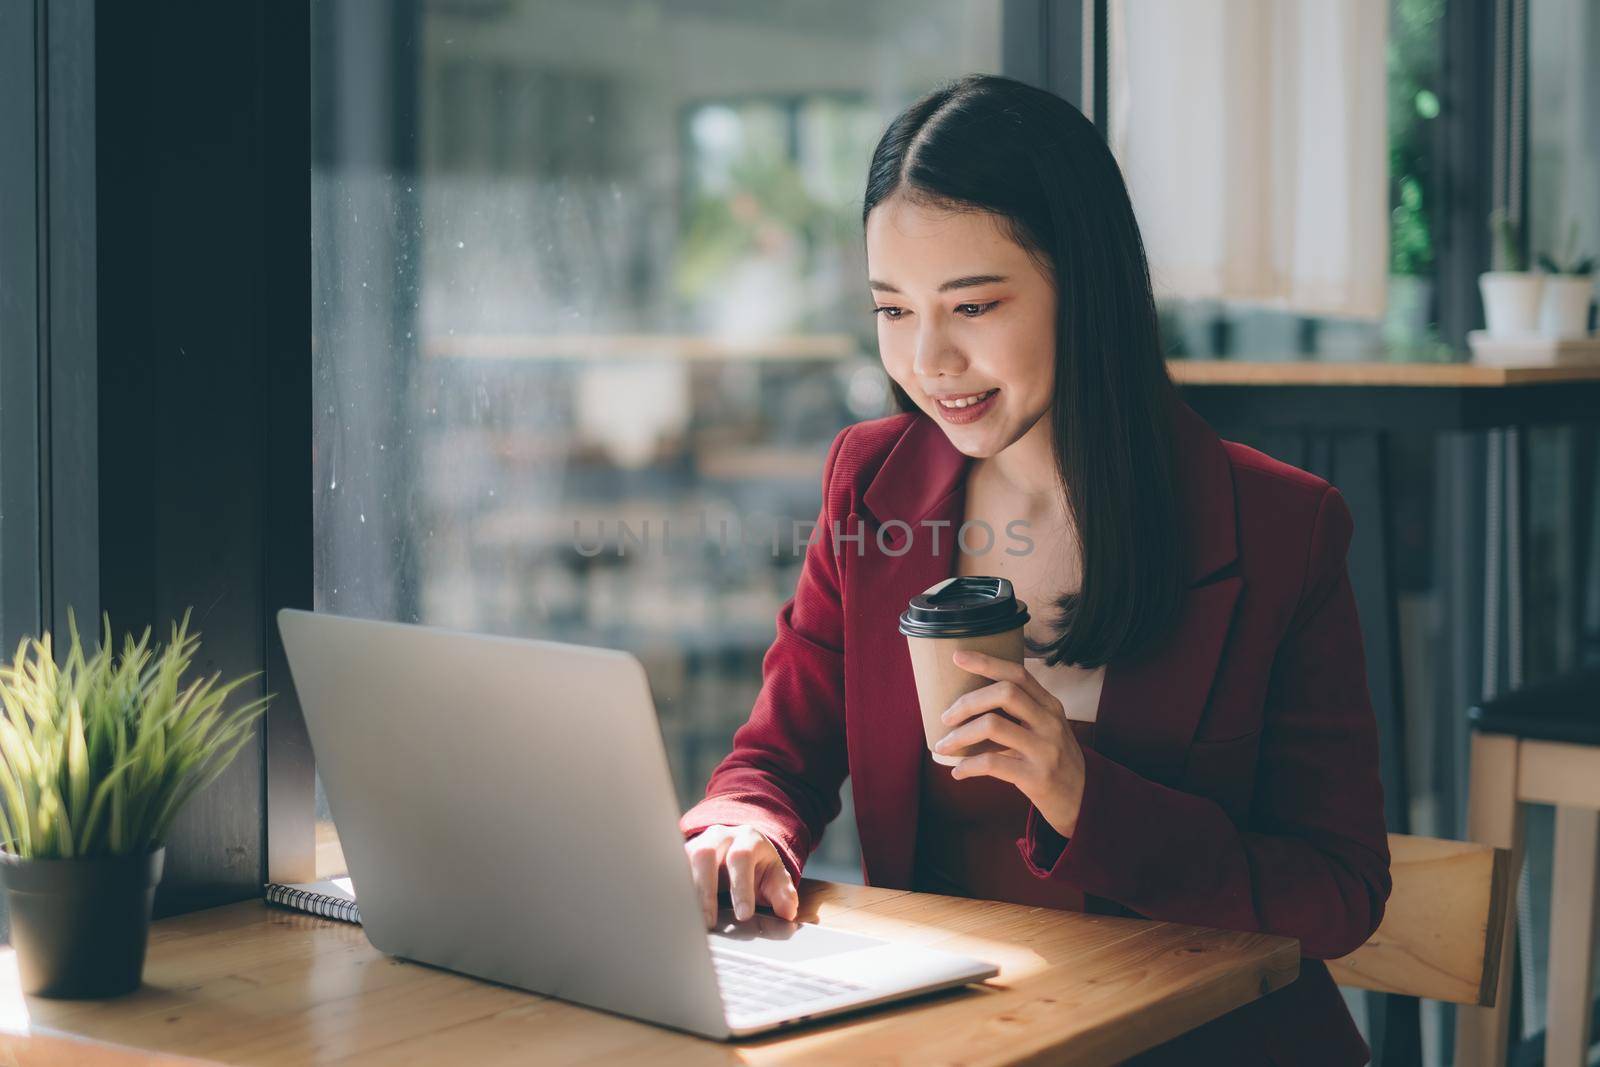 Business Finance and Accounting Concept. Business woman using security application on laptop to protect her money by itchaznong